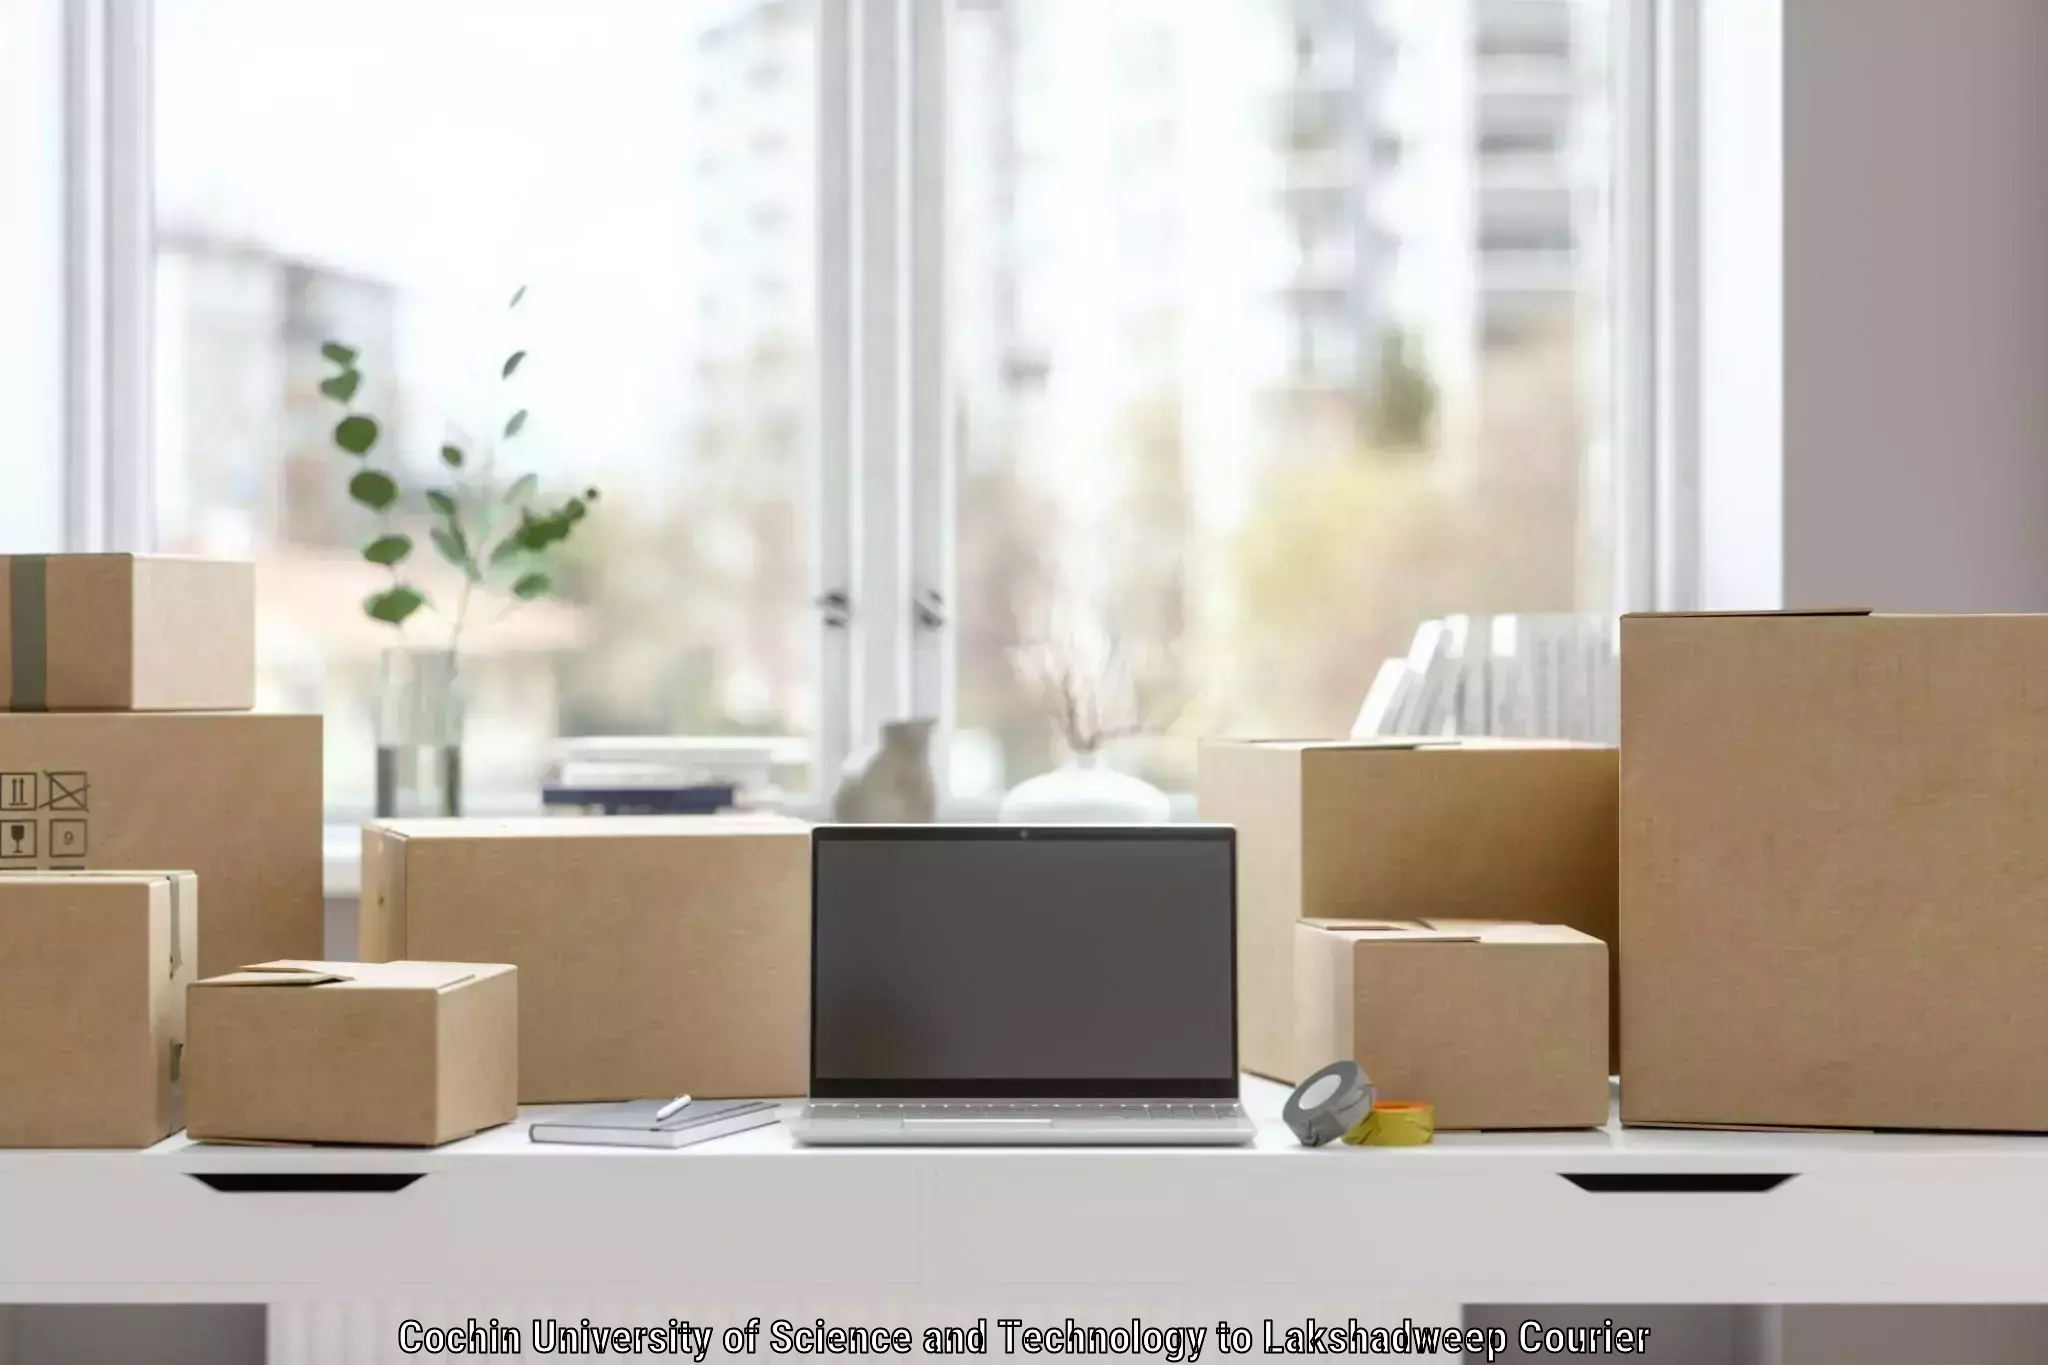 Online household goods transport Cochin University of Science and Technology to Lakshadweep